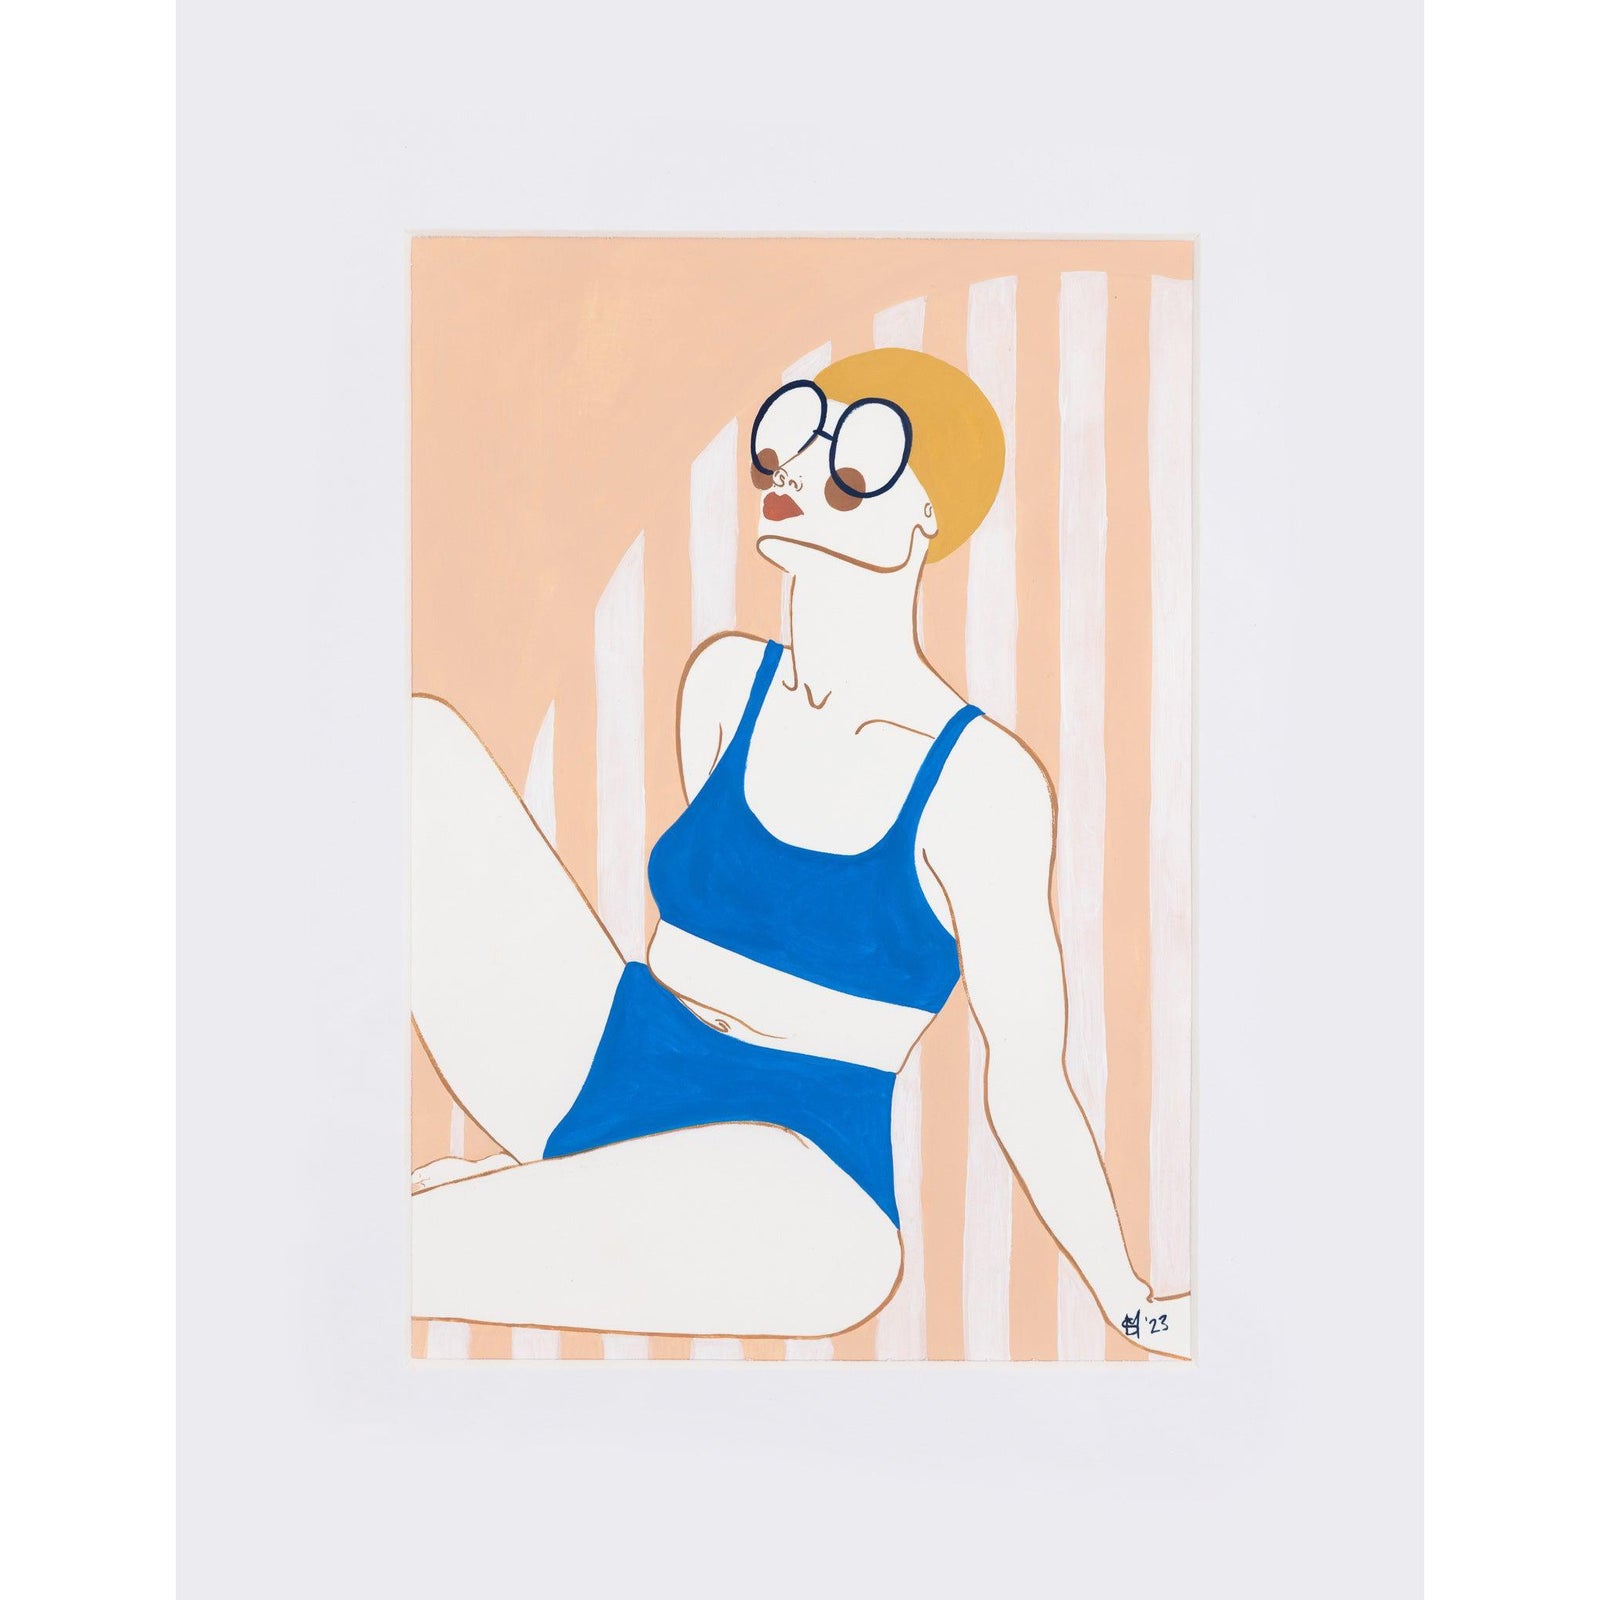 Pontoon Swimmer No7 gouache original by Sophie Moore, available at Padstow Gallery, Cornwall